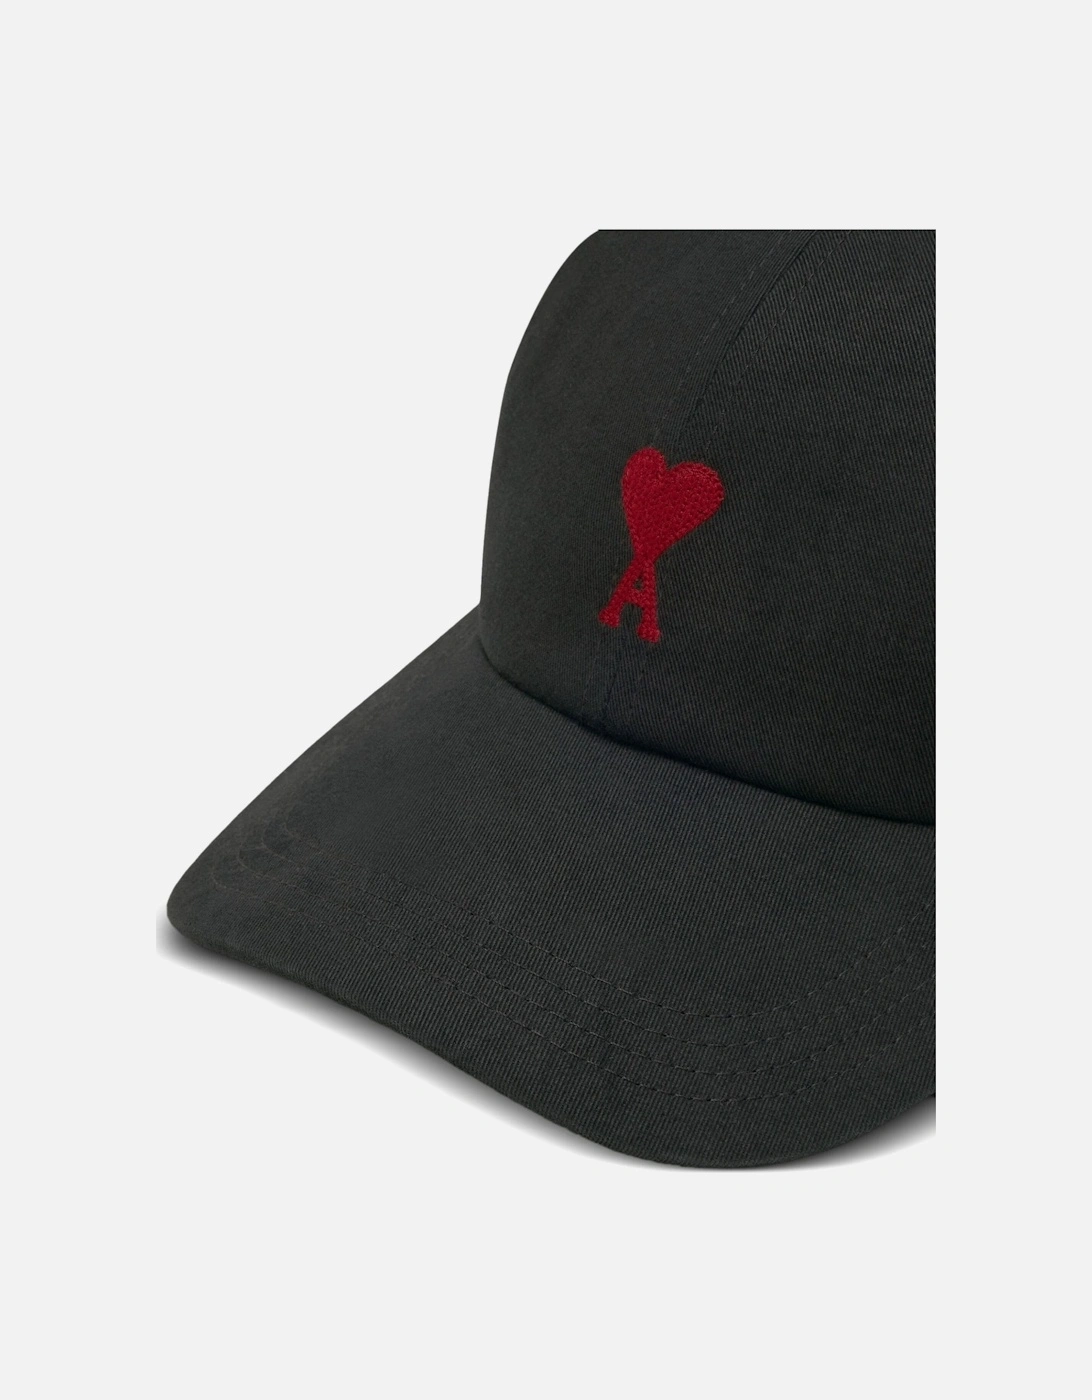 RED ADC Embroidery Cap Black